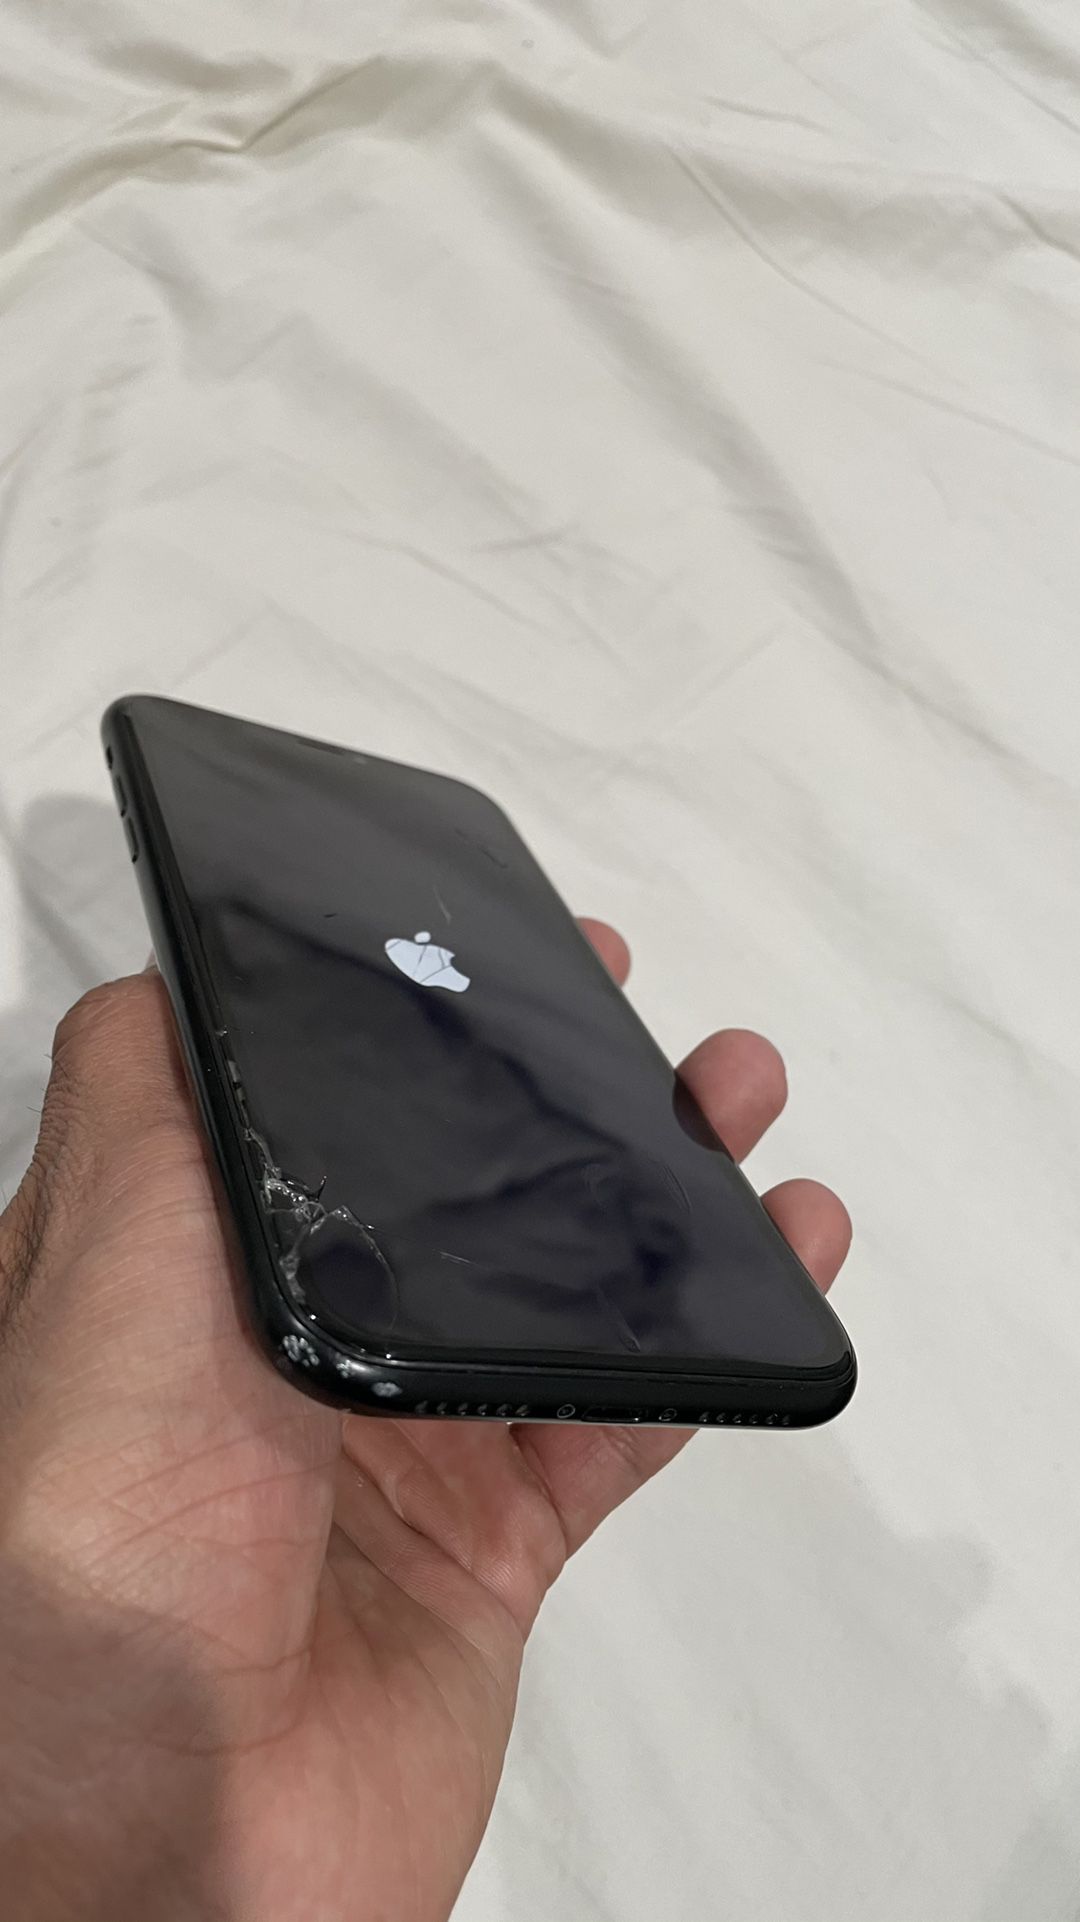 iPhone XR 128GB with Cracked Screen for Sale in Chicago, IL 